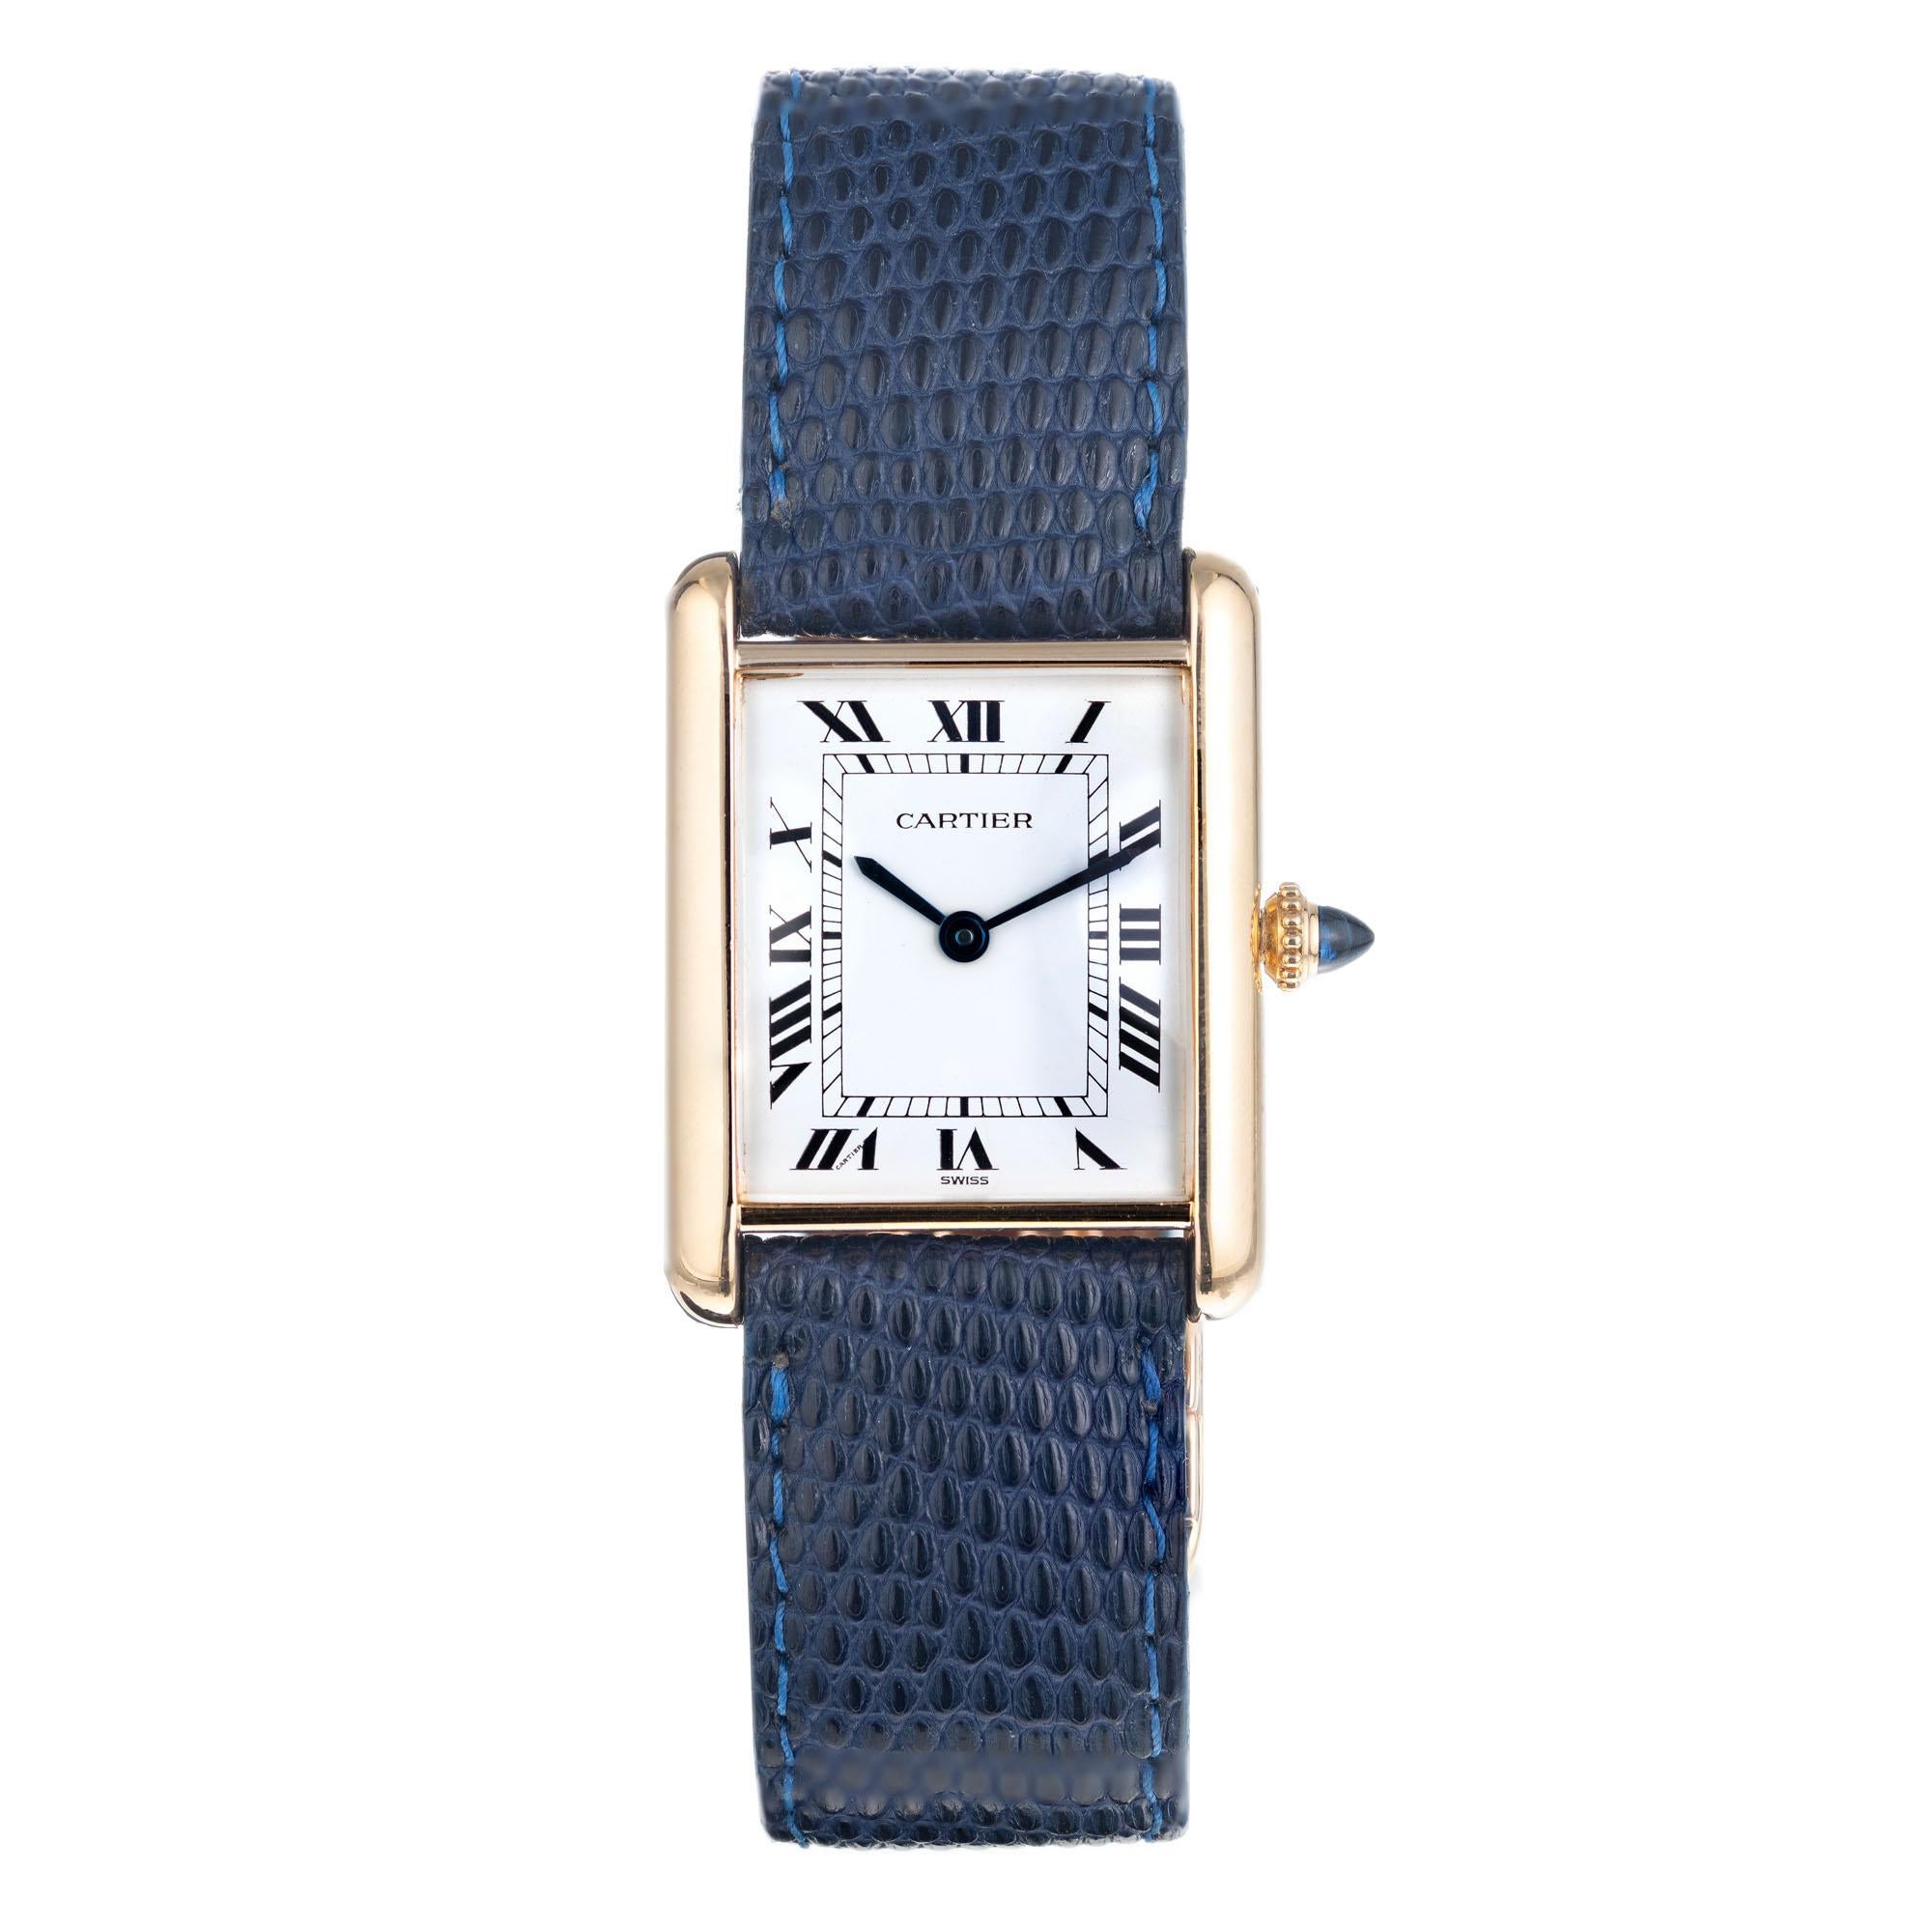 Vintage 1970's Cartier tank Louis manual wind wristwatch. Original white dial with Roman Numerals. 18k yellow gold Cartier deployant buckle with blue Cartier band.

Length: 30.24mm
Width: 23 mm
Width at case: 18mm
Case thickness: 6.59mm
Band: blue